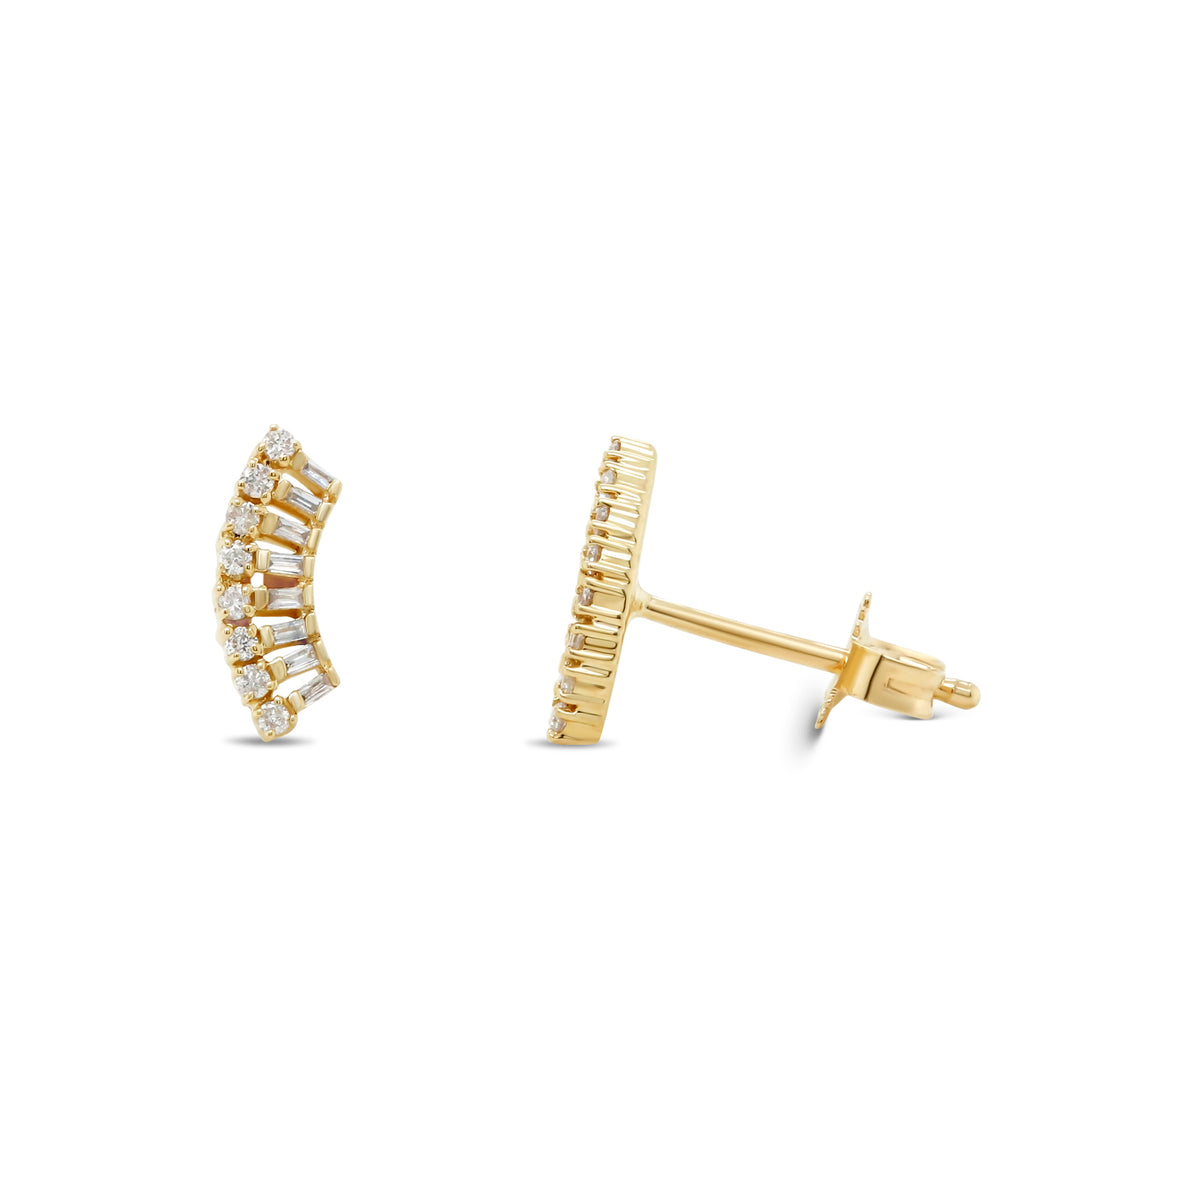 14k yellow gold baguette and round cut diamond ear climber stud earrings